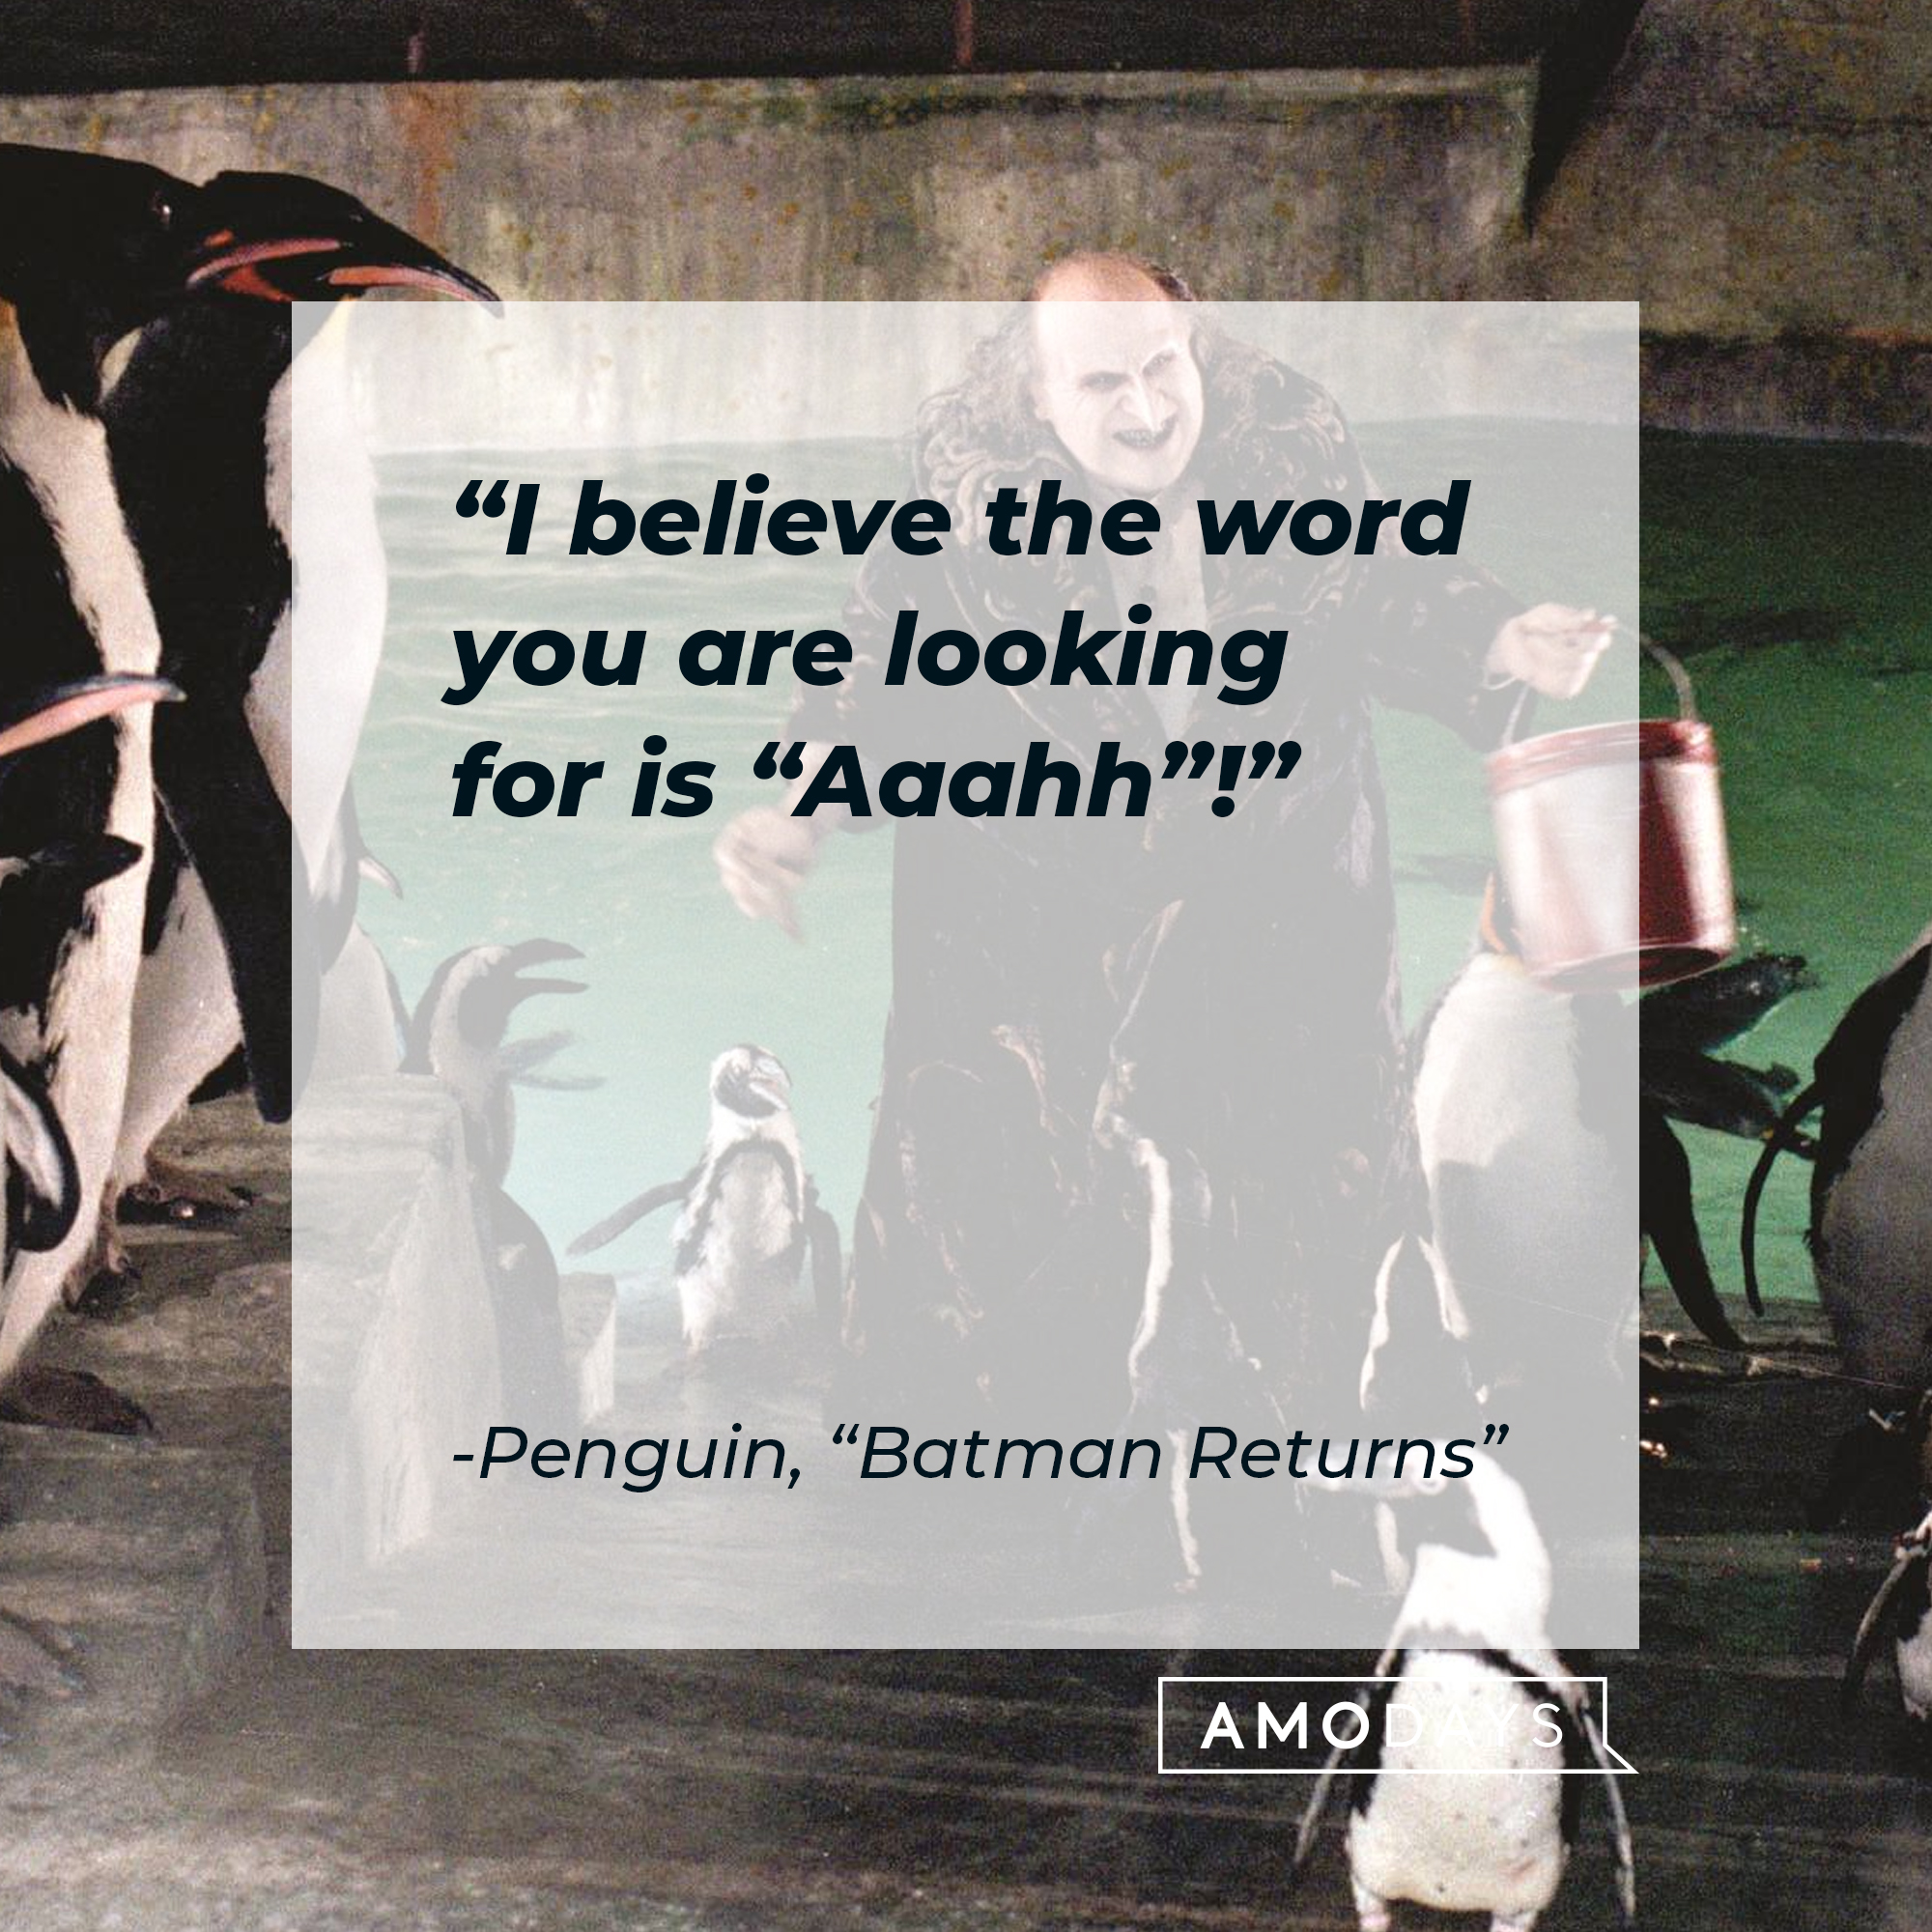 Penguin's quote from "Batman Returns" : "I believe the word you are looking for is "Aaahh!" | Source: facebook.com/BatmanReturnsFilm